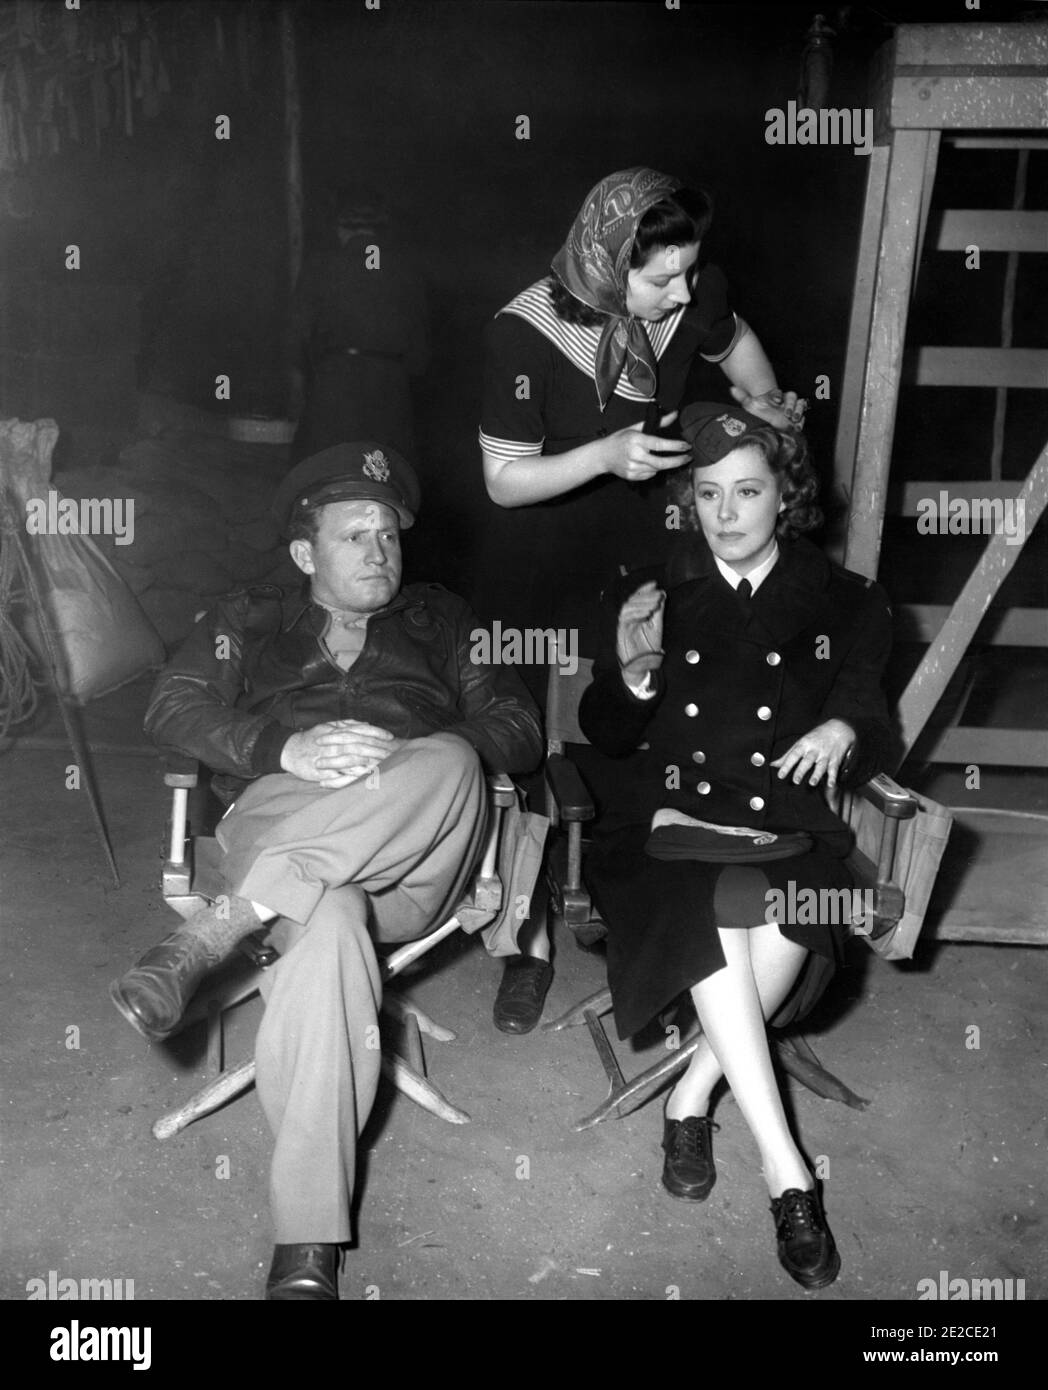 SPENCER TRACY and IRENE DUNNE on set candid while Wardrobe Assistant places her Cap on correctly during filming of A GUY NAMED JOE 1943 director VICTOR FLEMING screenplay Dalton Trumbo Metro Goldwyn Mayer Stock Photo